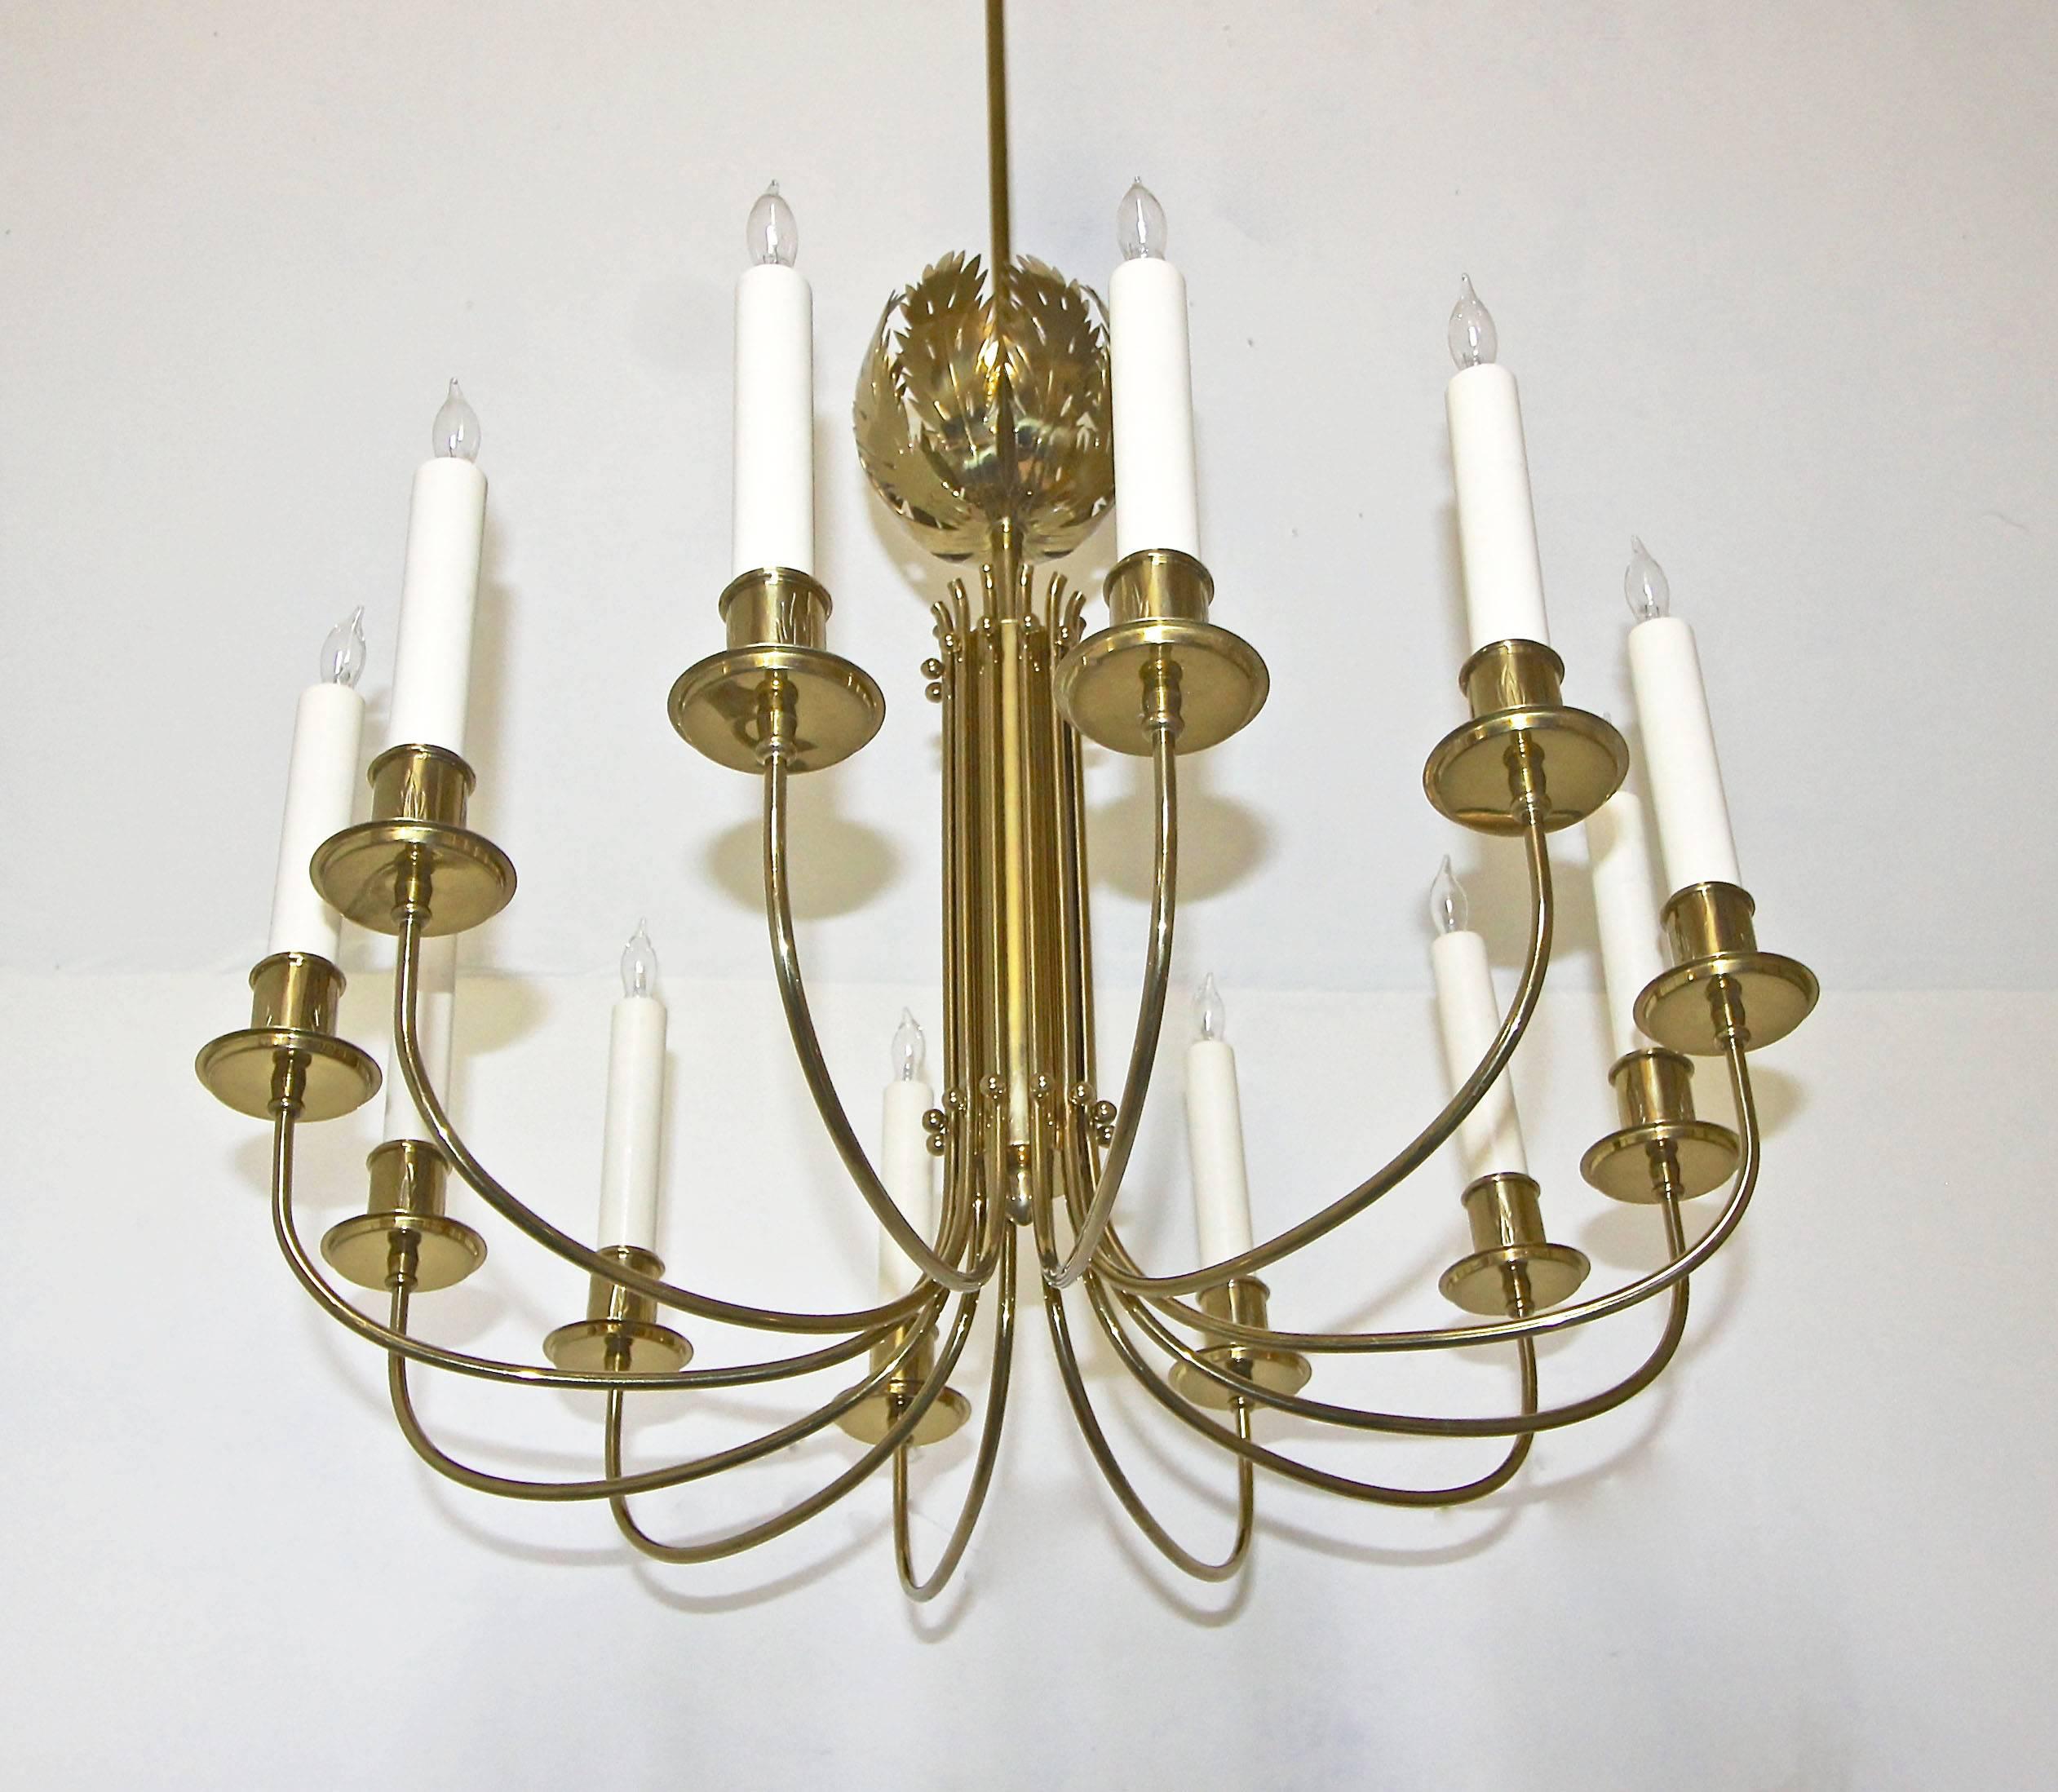 A very rare solid brass chandelier designed by Tommi Parzinger for Parzinger Originals and handcrafted by Fliex Balbo. Solid brass construction with beautiful acanthus leaf motif that is repeated on each candle cup. Newly wired and retaining the